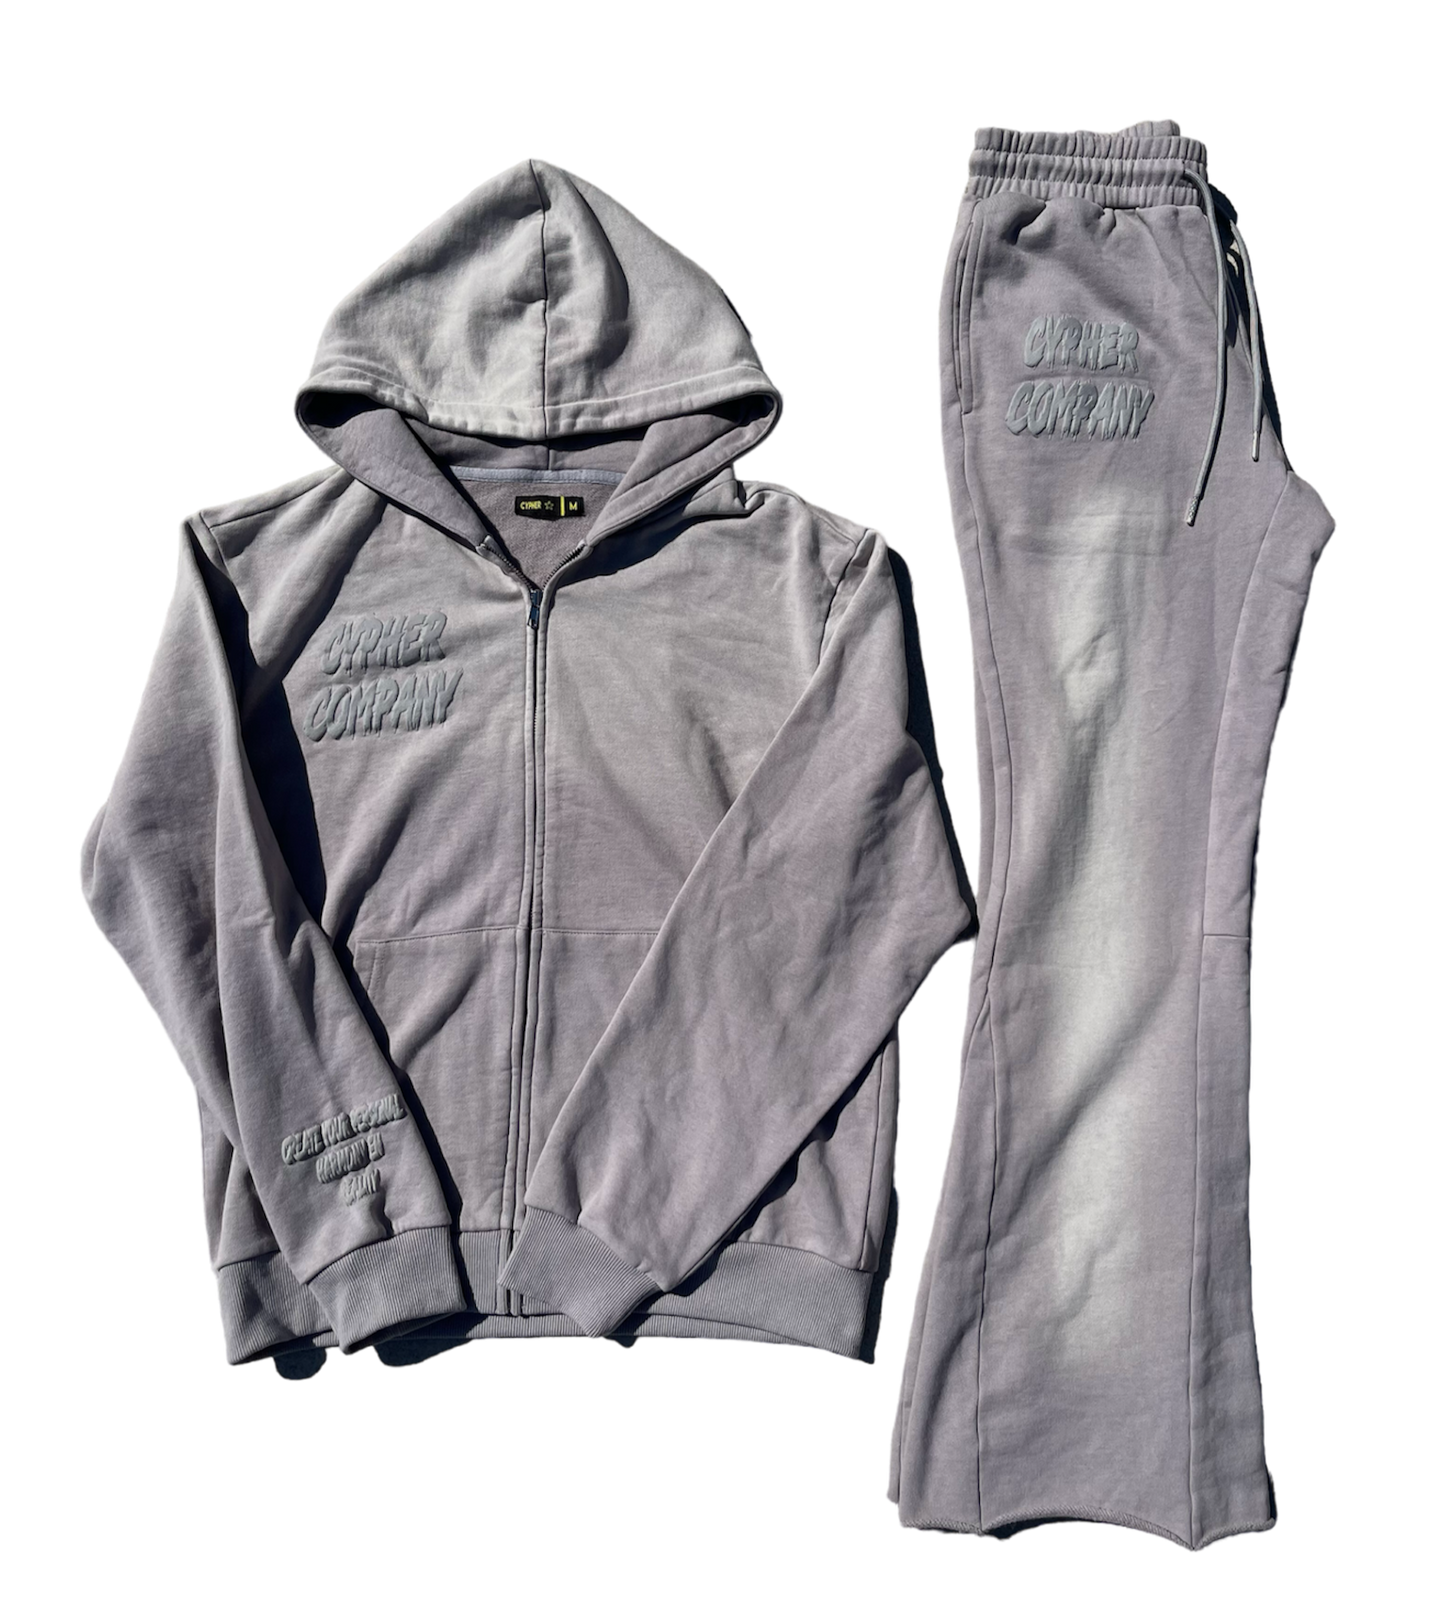 GREY WASHED TRACK-SUIT